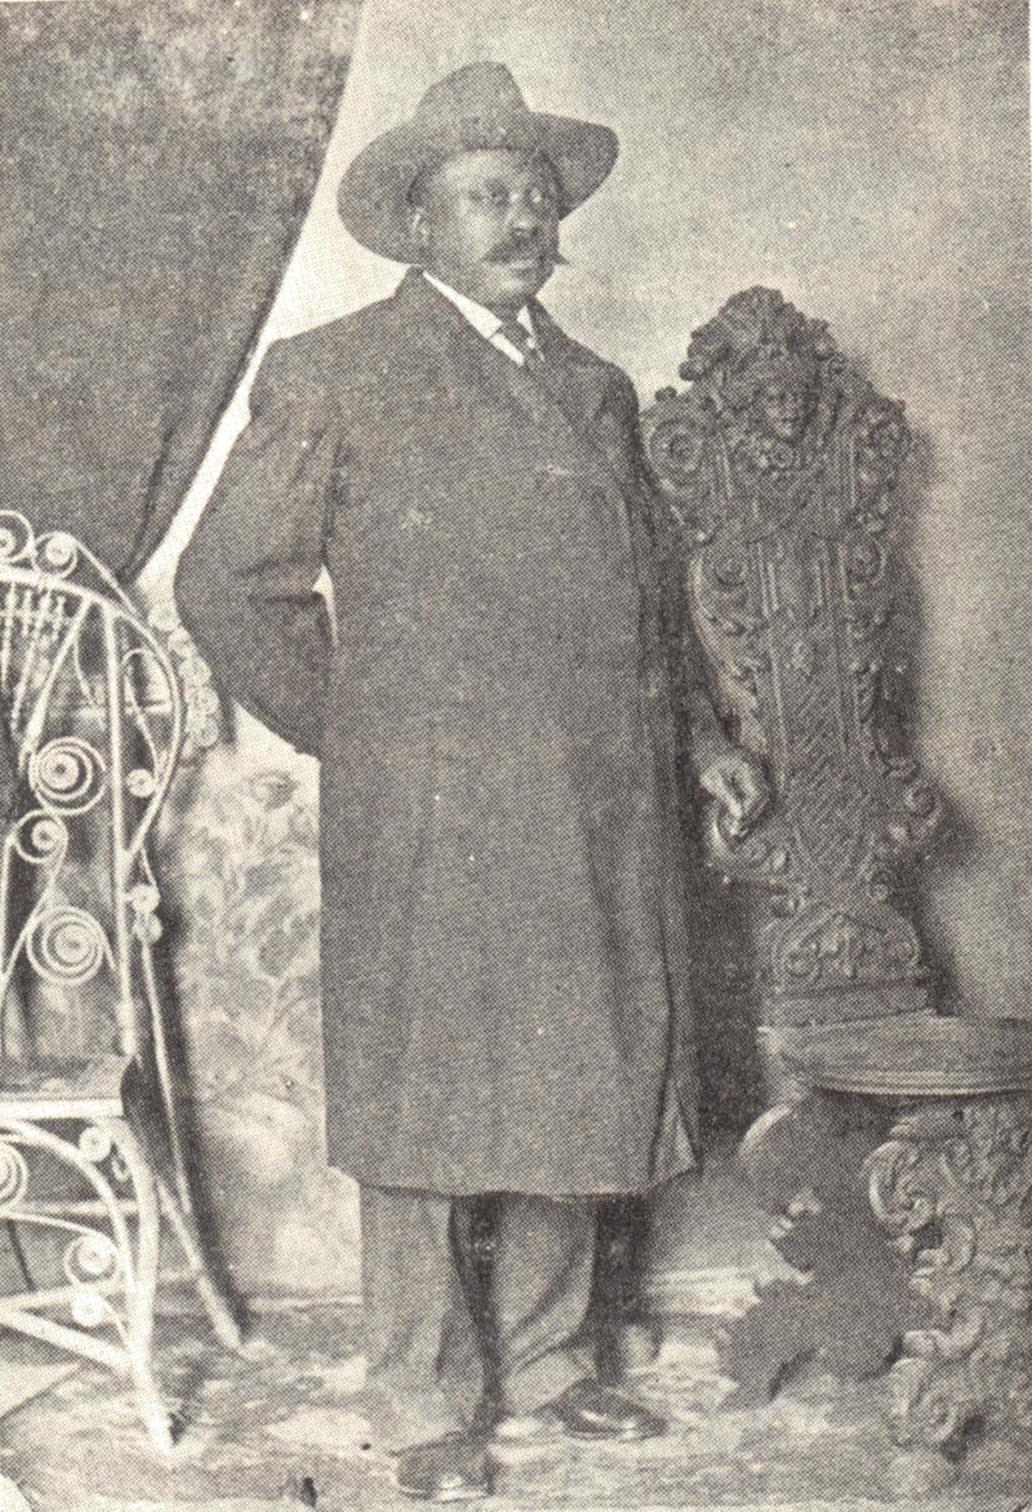 Richmond attorney Giles B. Jackson (1853-1924), director-general of the Negro Development and Exposition Company (NDEC) and the visionary behind the Jamestown Tercentennial Exposition’s Negro Building.